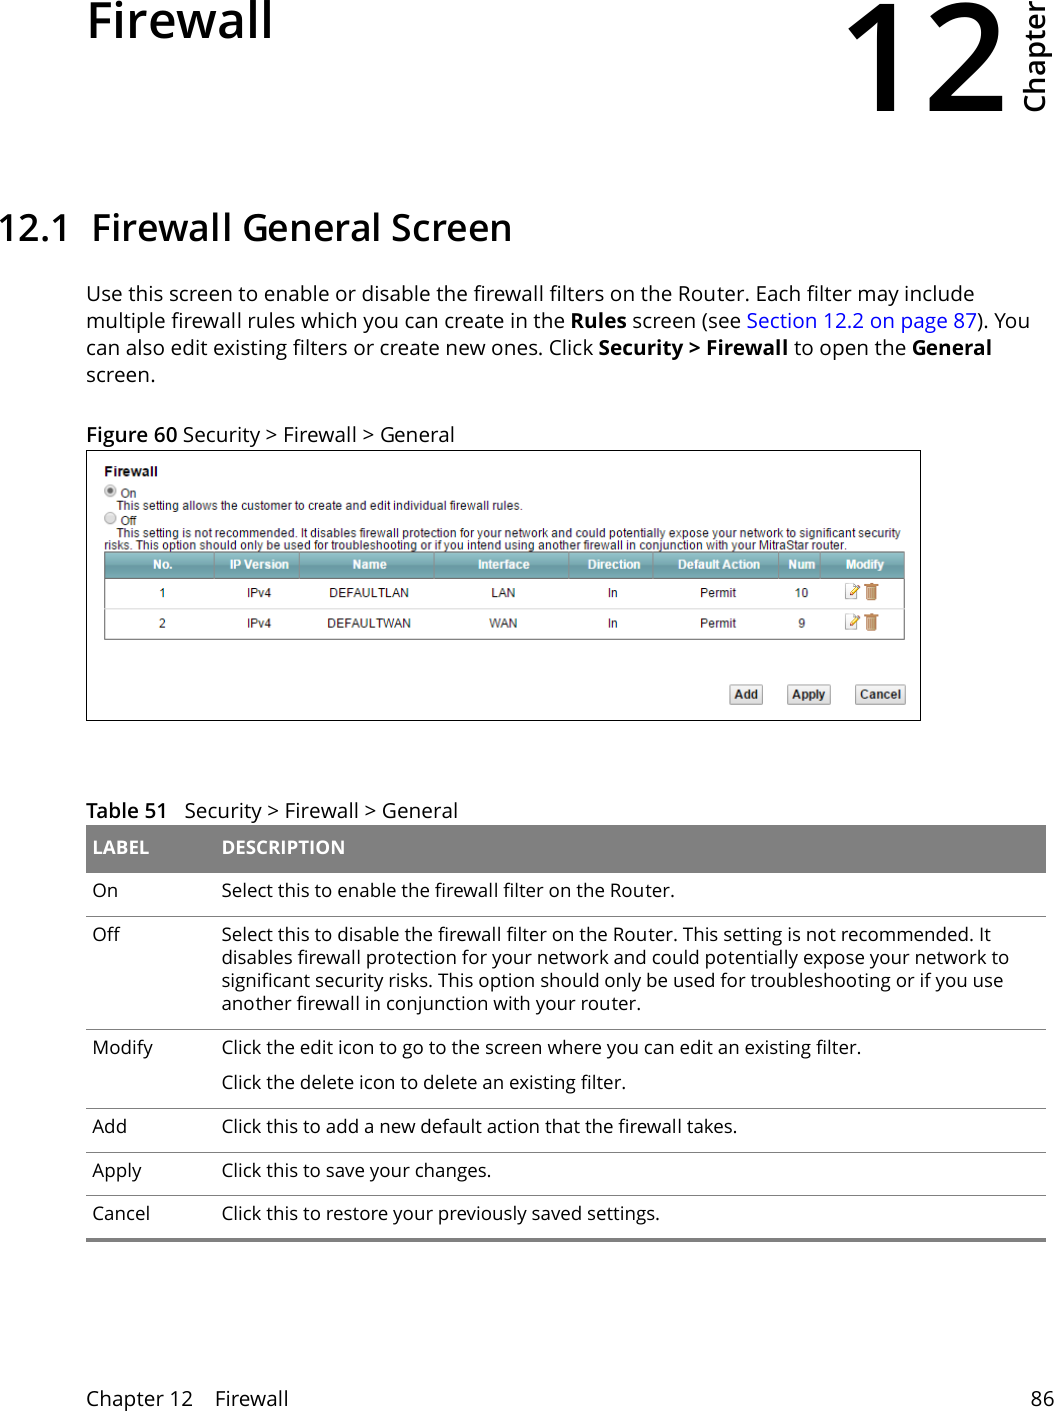 12Chapter Chapter 12    Firewall 86CHAPTER 12 Chapter 12 Firewall12.1  Firewall General ScreenUse this screen to enable or disable the firewall filters on the Router. Each filter may include multiple firewall rules which you can create in the Rules screen (see Section 12.2 on page 87). You can also edit existing filters or create new ones. Click Security &gt; Firewall to open the General screen.Figure 60 Security &gt; Firewall &gt; GeneralTable 51   Security &gt; Firewall &gt; General LABEL DESCRIPTIONOn Select this to enable the firewall filter on the Router. Off Select this to disable the firewall filter on the Router. This setting is not recommended. It disables firewall protection for your network and could potentially expose your network to significant security risks. This option should only be used for troubleshooting or if you use another firewall in conjunction with your router.Modify Click the edit icon to go to the screen where you can edit an existing filter.Click the delete icon to delete an existing filter.Add Click this to add a new default action that the firewall takes.Apply Click this to save your changes.Cancel Click this to restore your previously saved settings.